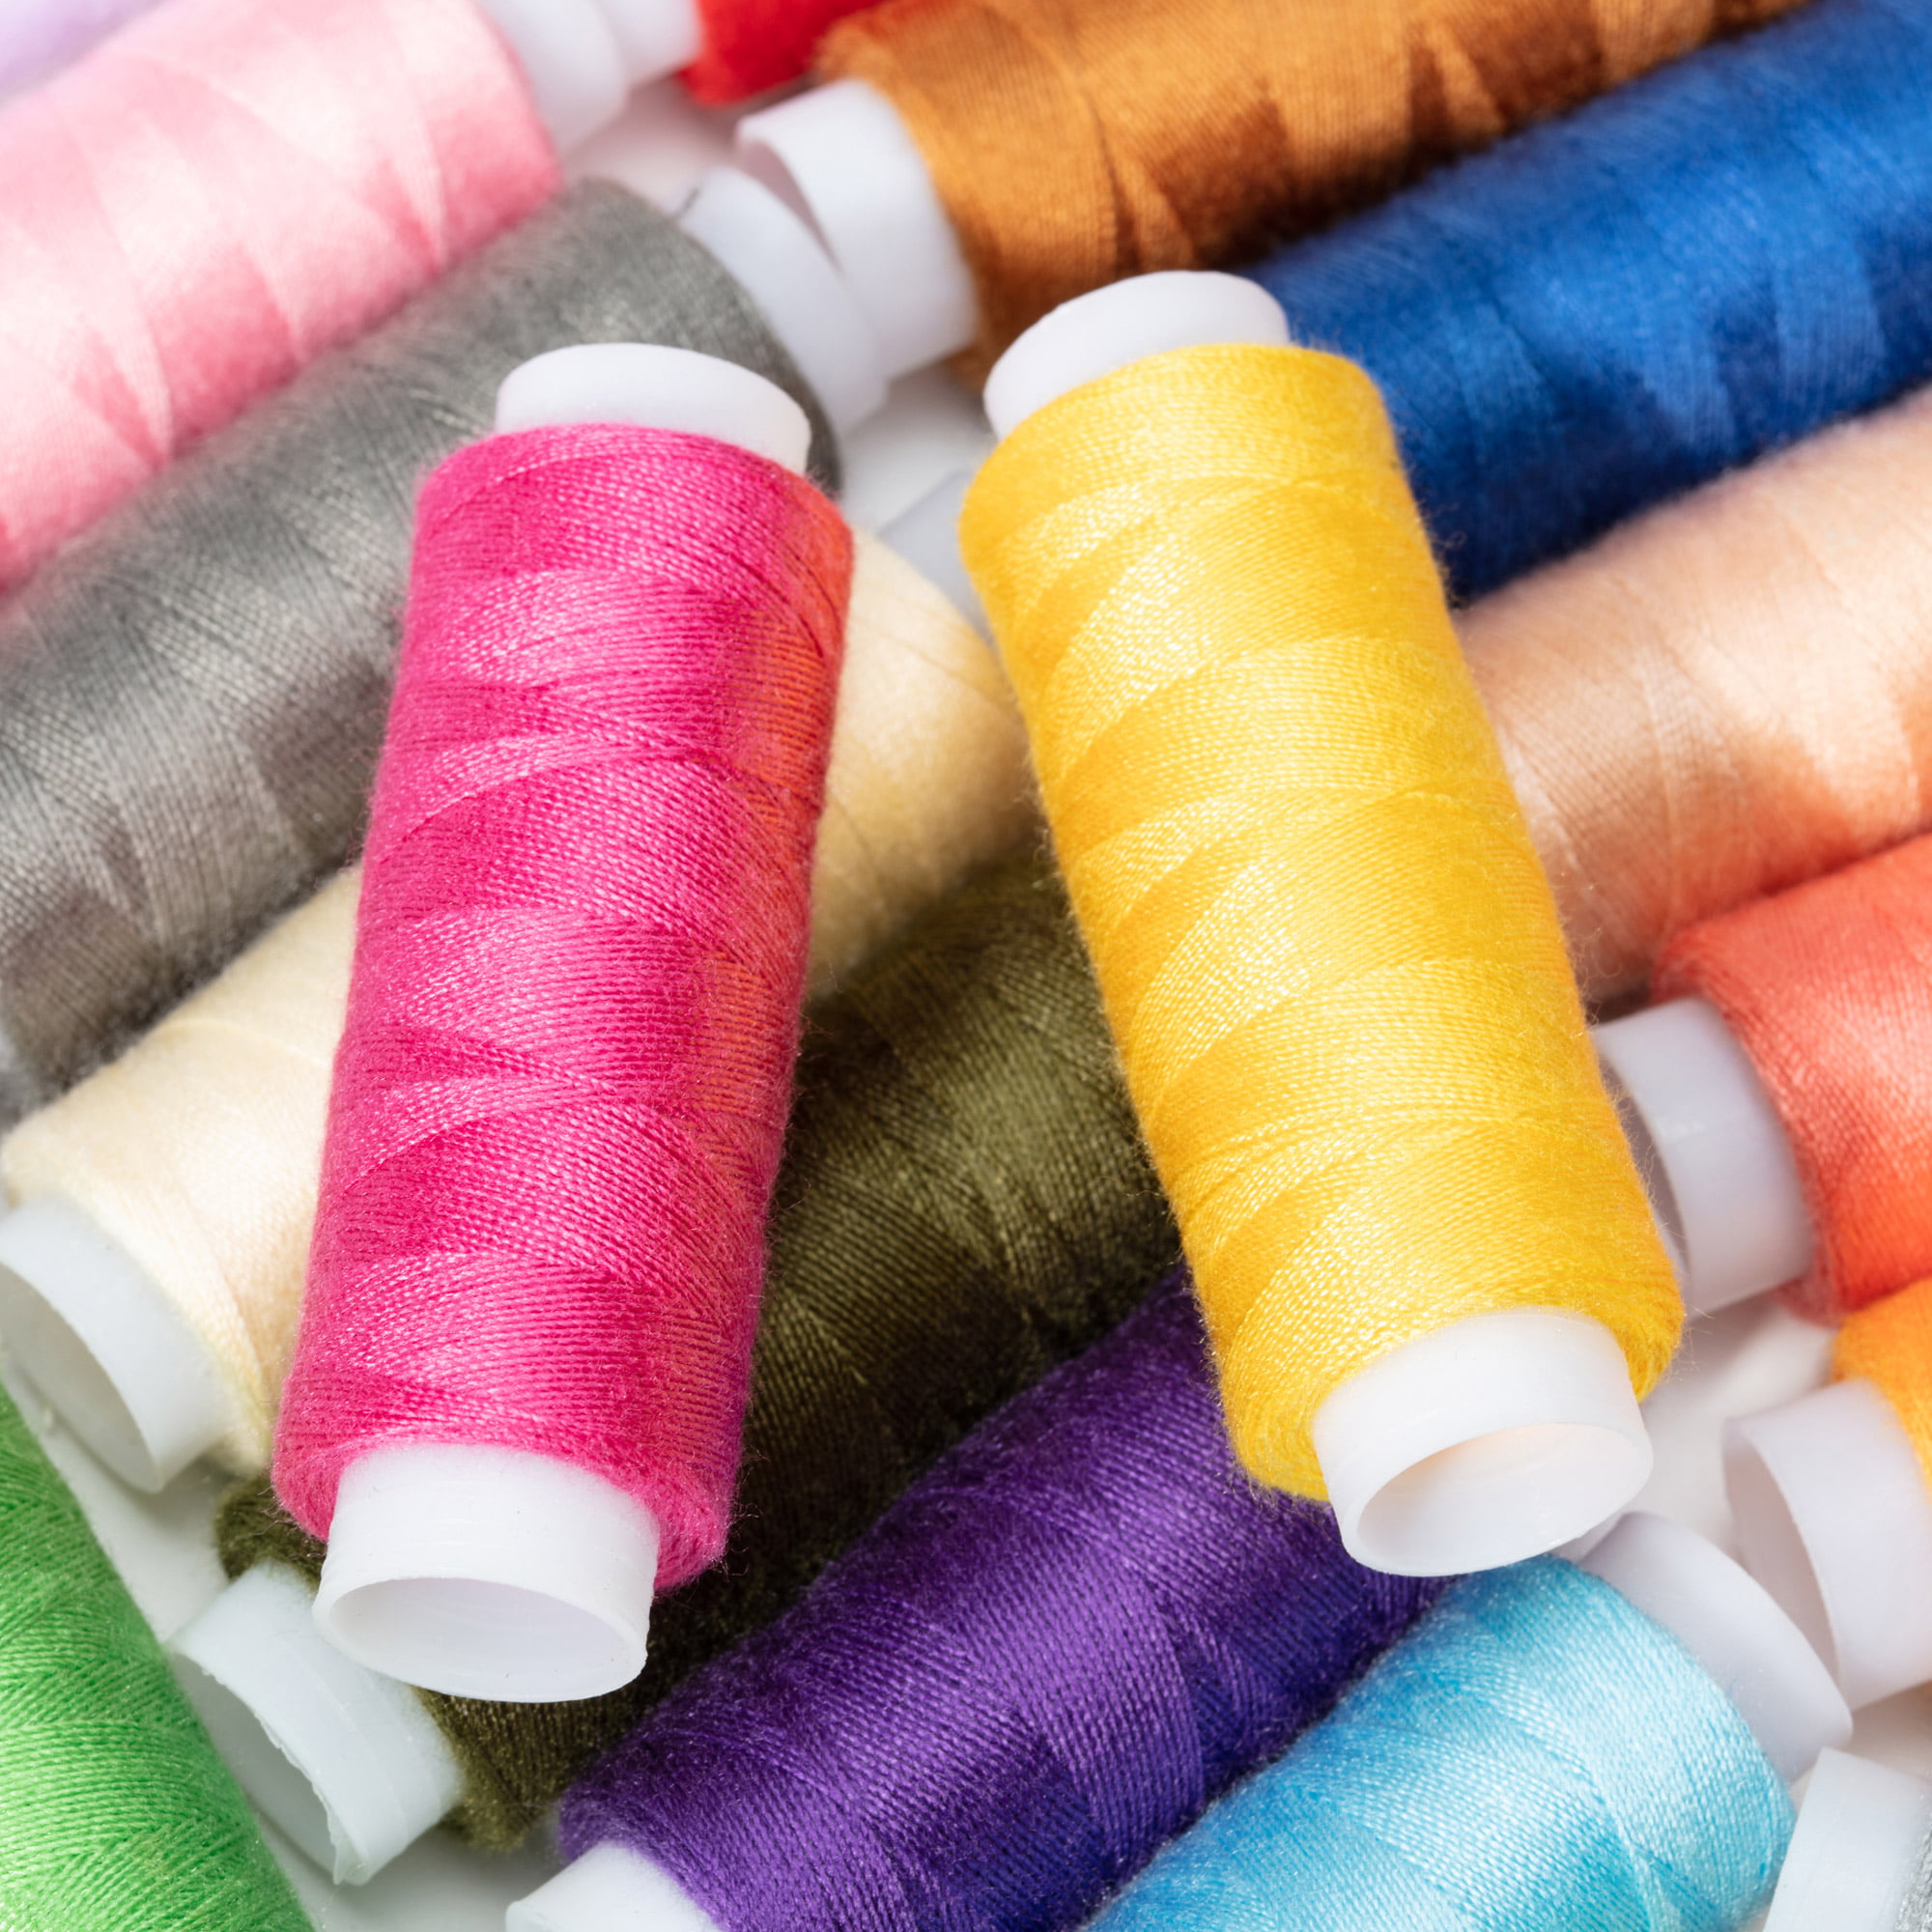 Sewing Thread - All-Purpose Thread - Beautiful Colors —